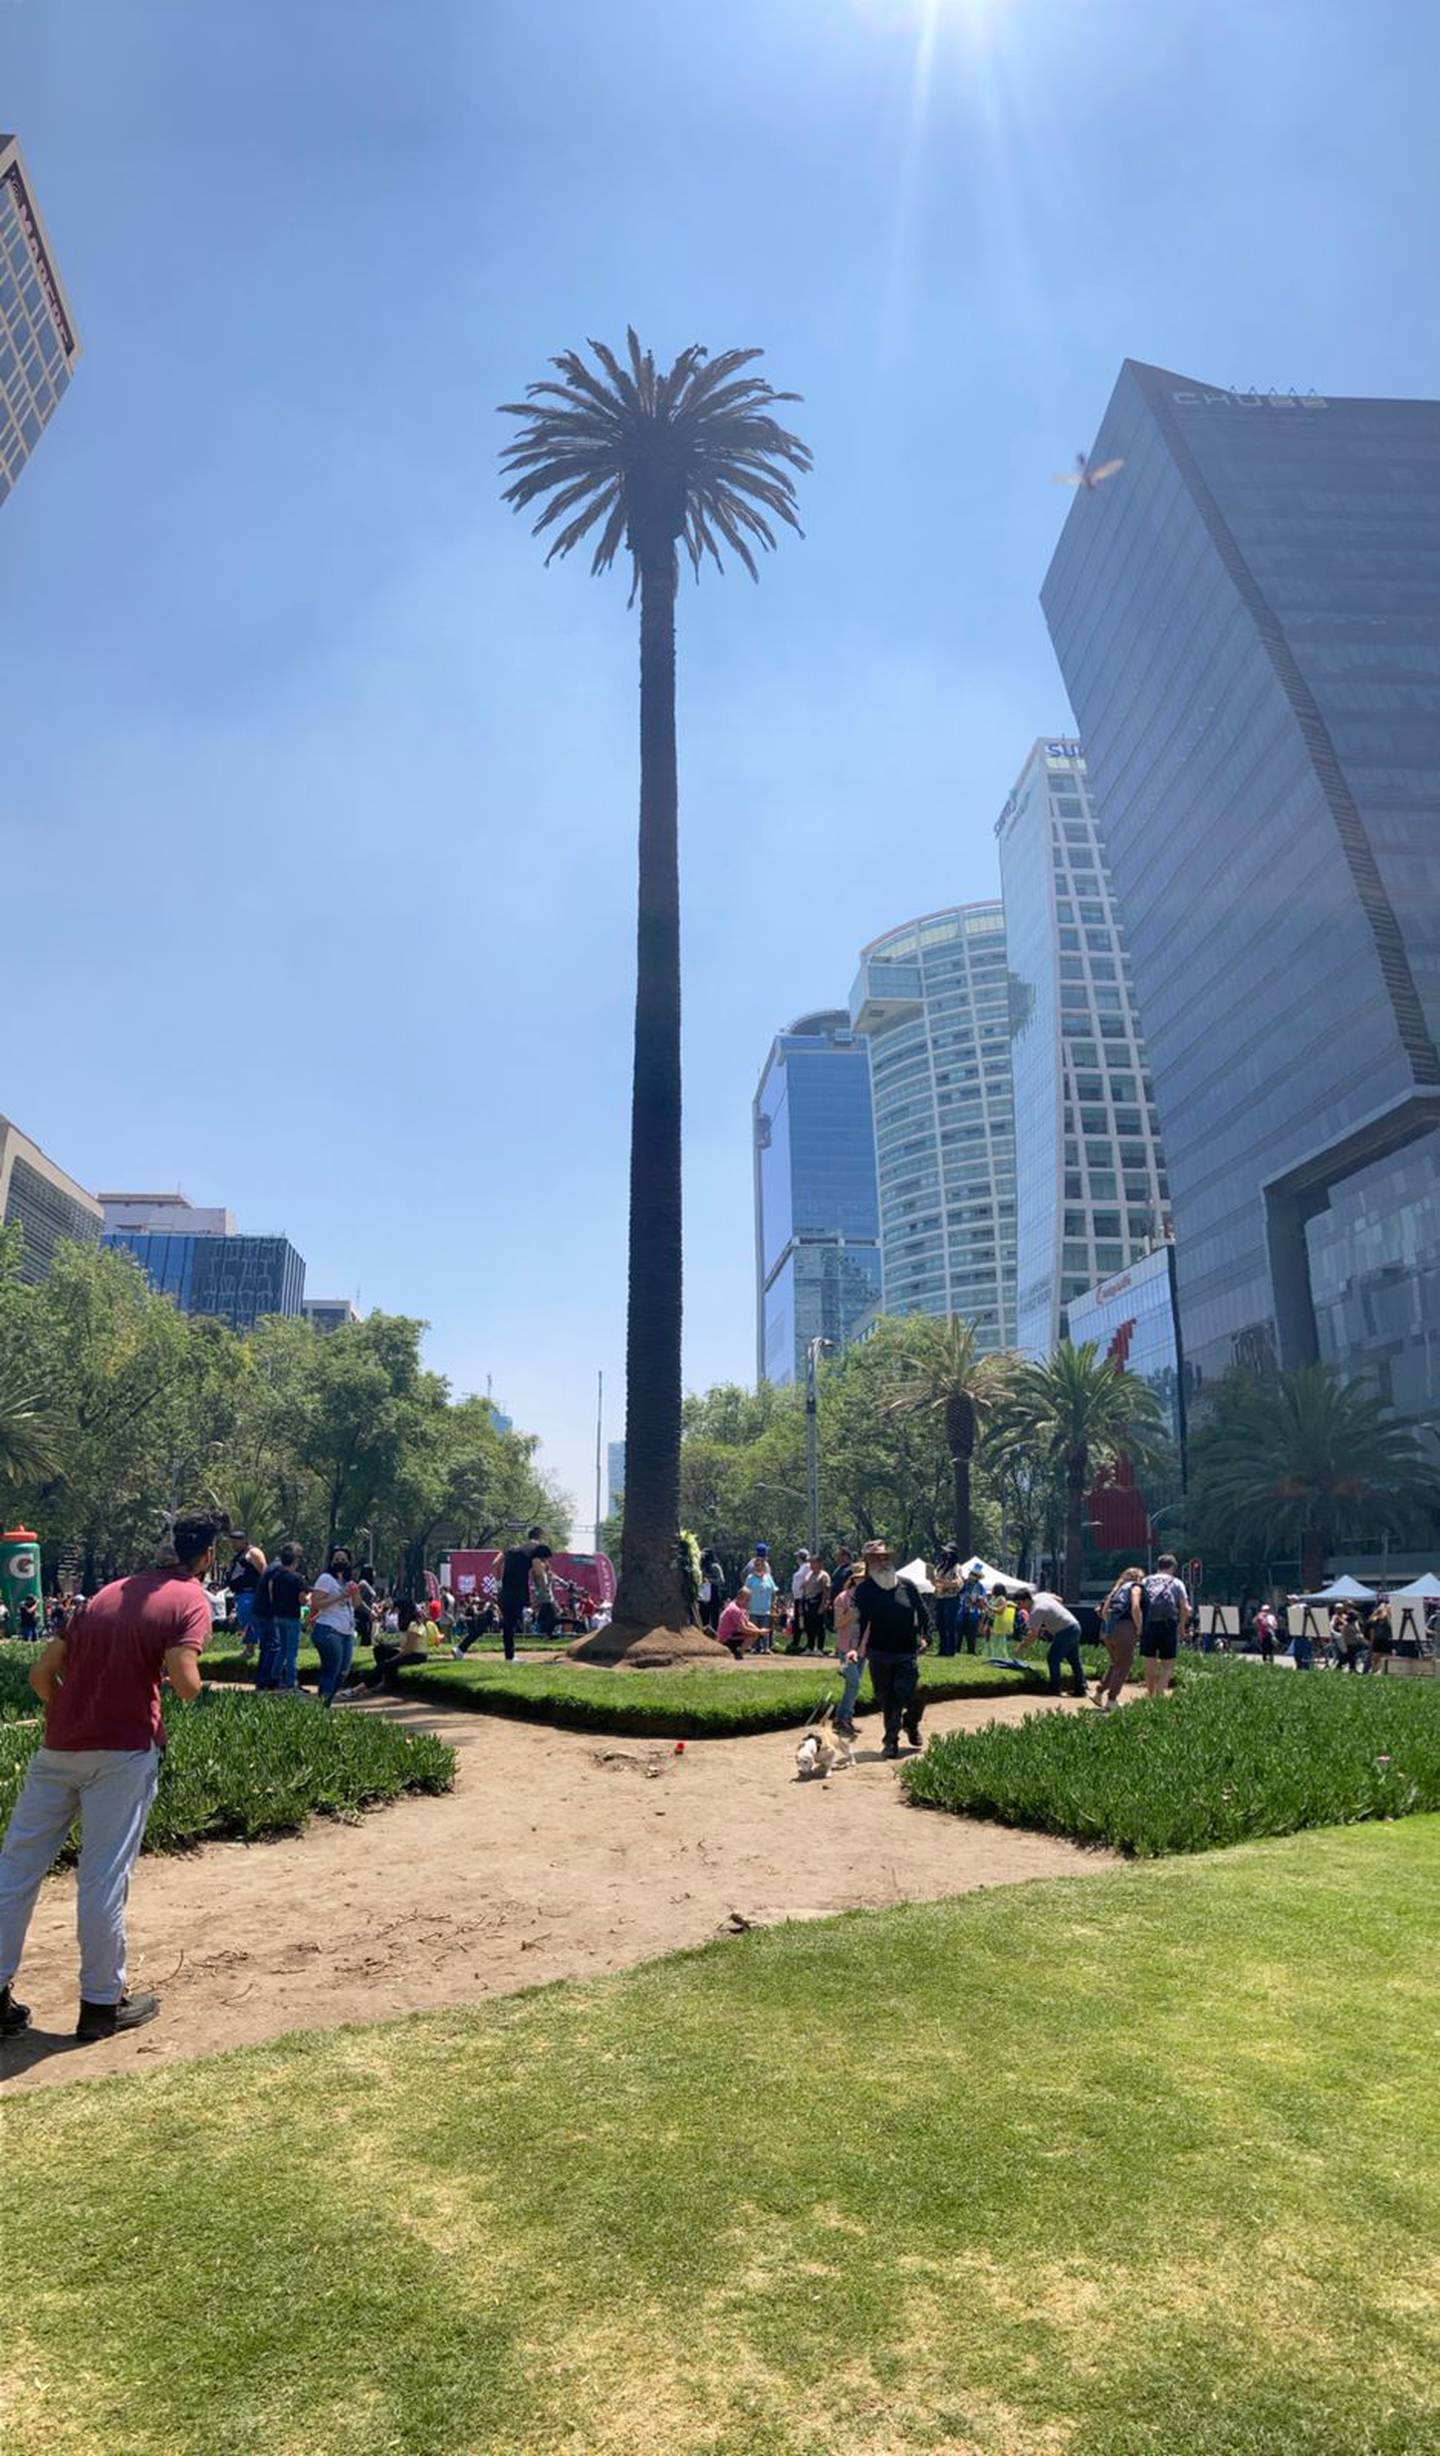 'Goodbye, blessed palm tree': Between thanks and prayers they say goodbye to La Palma de Reforma